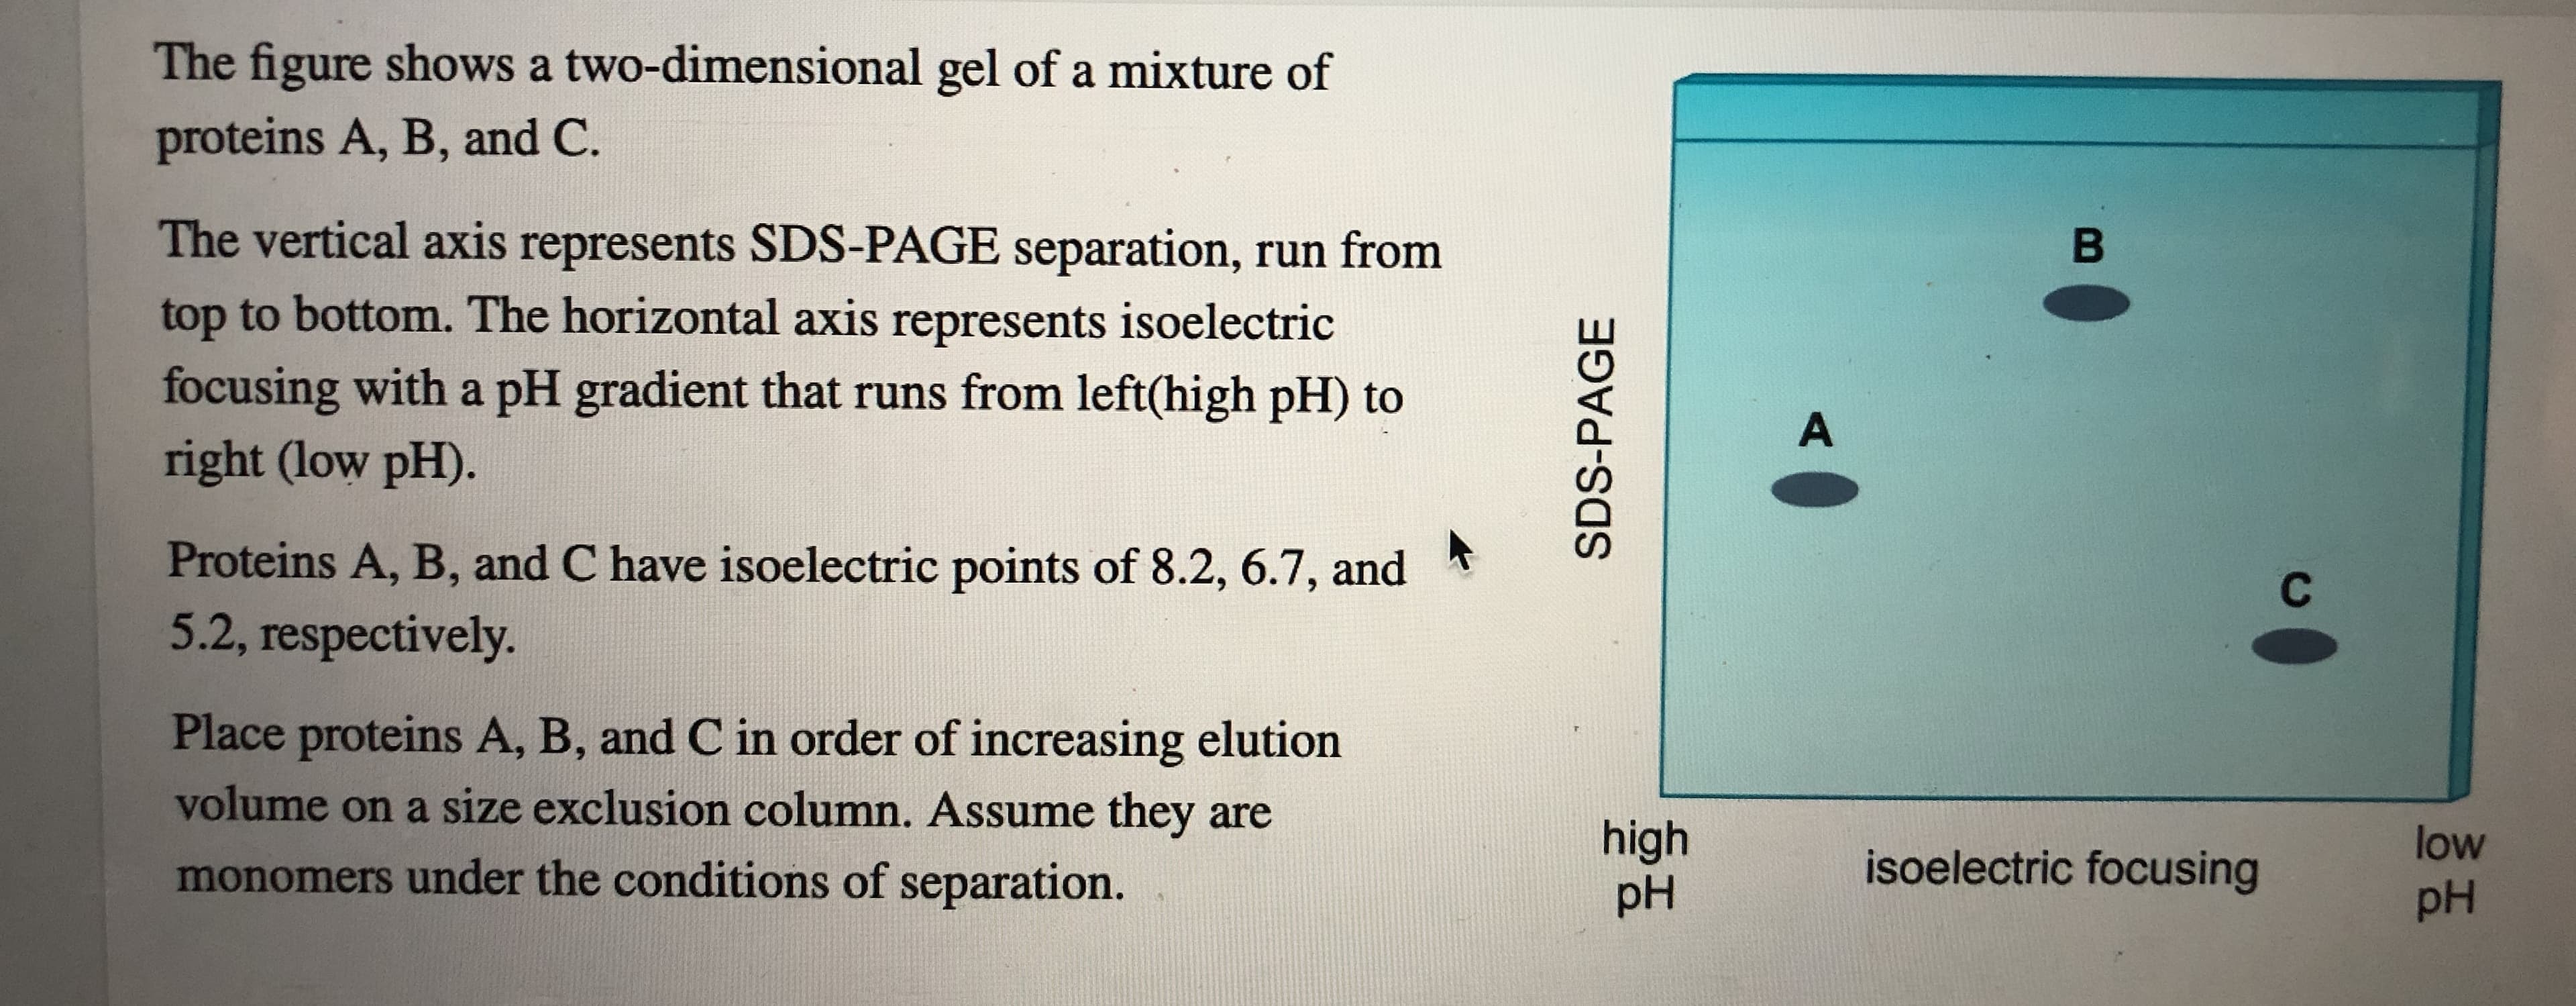 The figure shows a two-dimensional gel of a mixture of
proteins A, B, and C.
The vertical axis represents SDS-PAGE separation, run from
top to bottom. The horizontal axis represents isoelectric
focusing with a pH gradient that runs from left(high pH) to
right (low pH).
В
A
Proteins A, B, and C have isoelectric points of 8.2, 6.7, and
5.2, respectively.
С
Place proteins A, B, and C in order of increasing elution
volume on a size exclusion column. Assume they are
high
pH
low
isoelectric focusing
monomers under the conditions of separation.
pH
SDS-PAGE
